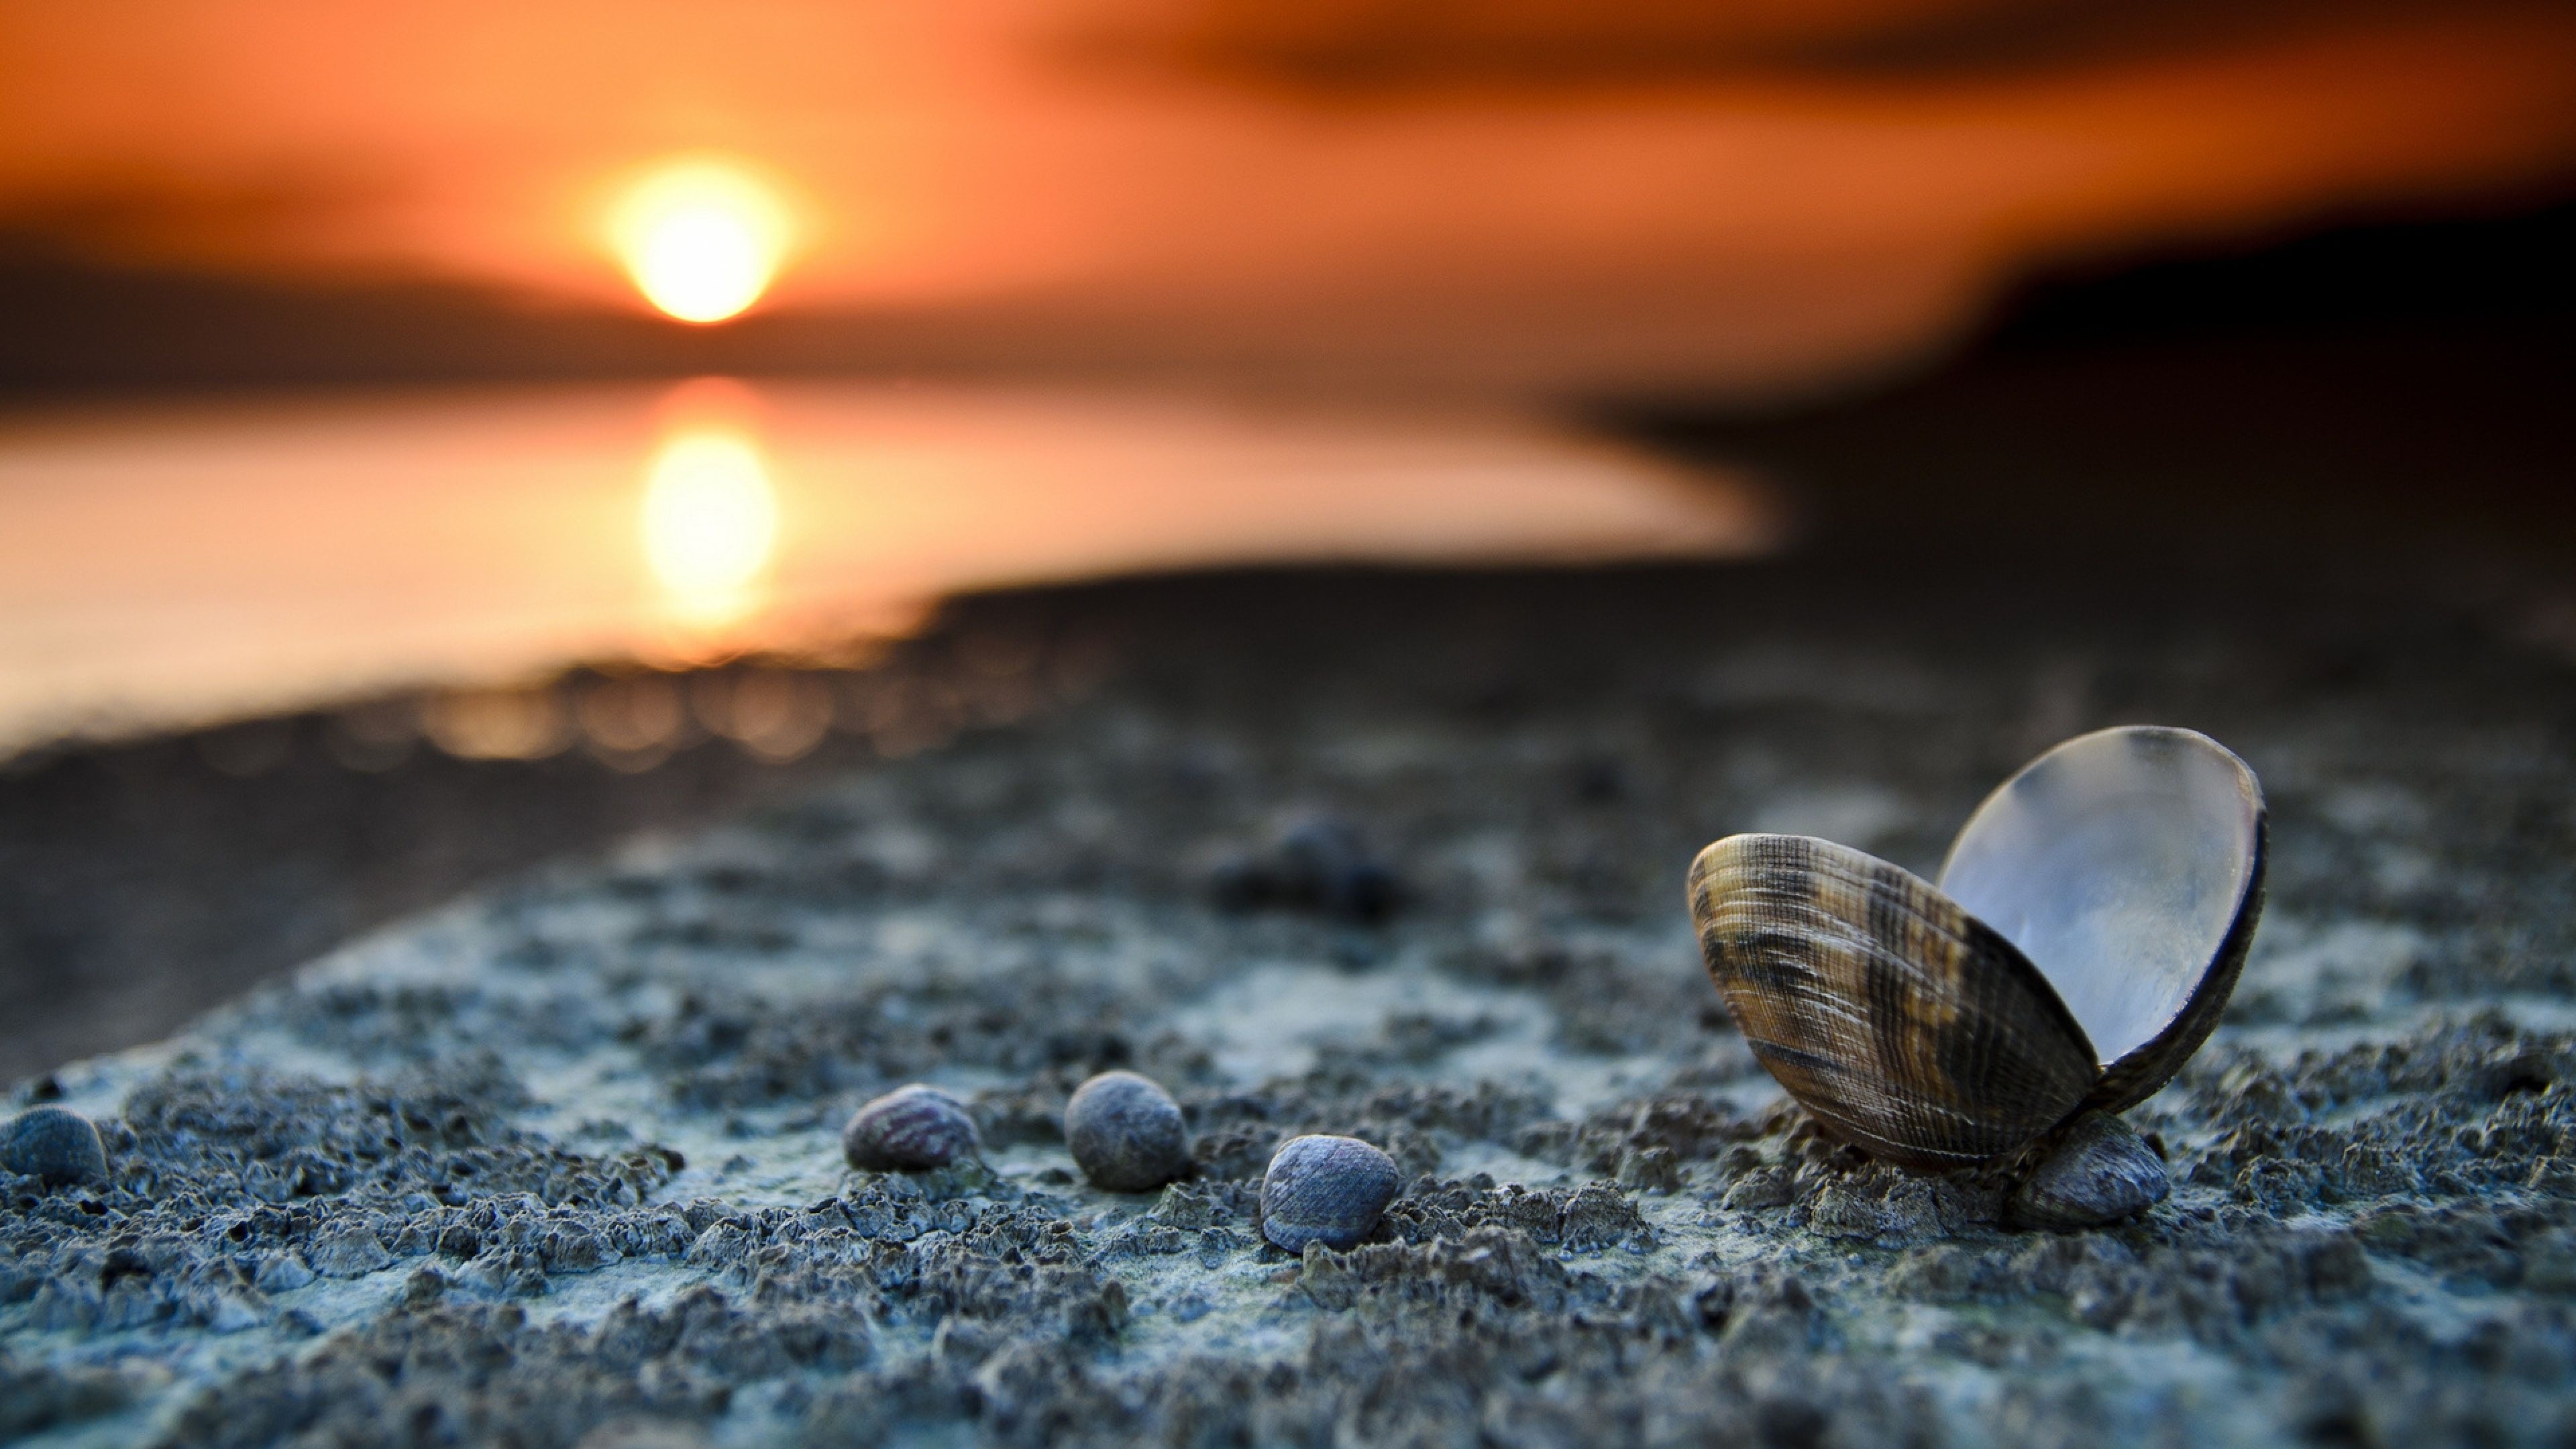 Sea Shell: Are commonly found in beach drift, which is natural detritus. 3840x2160 4K Wallpaper.